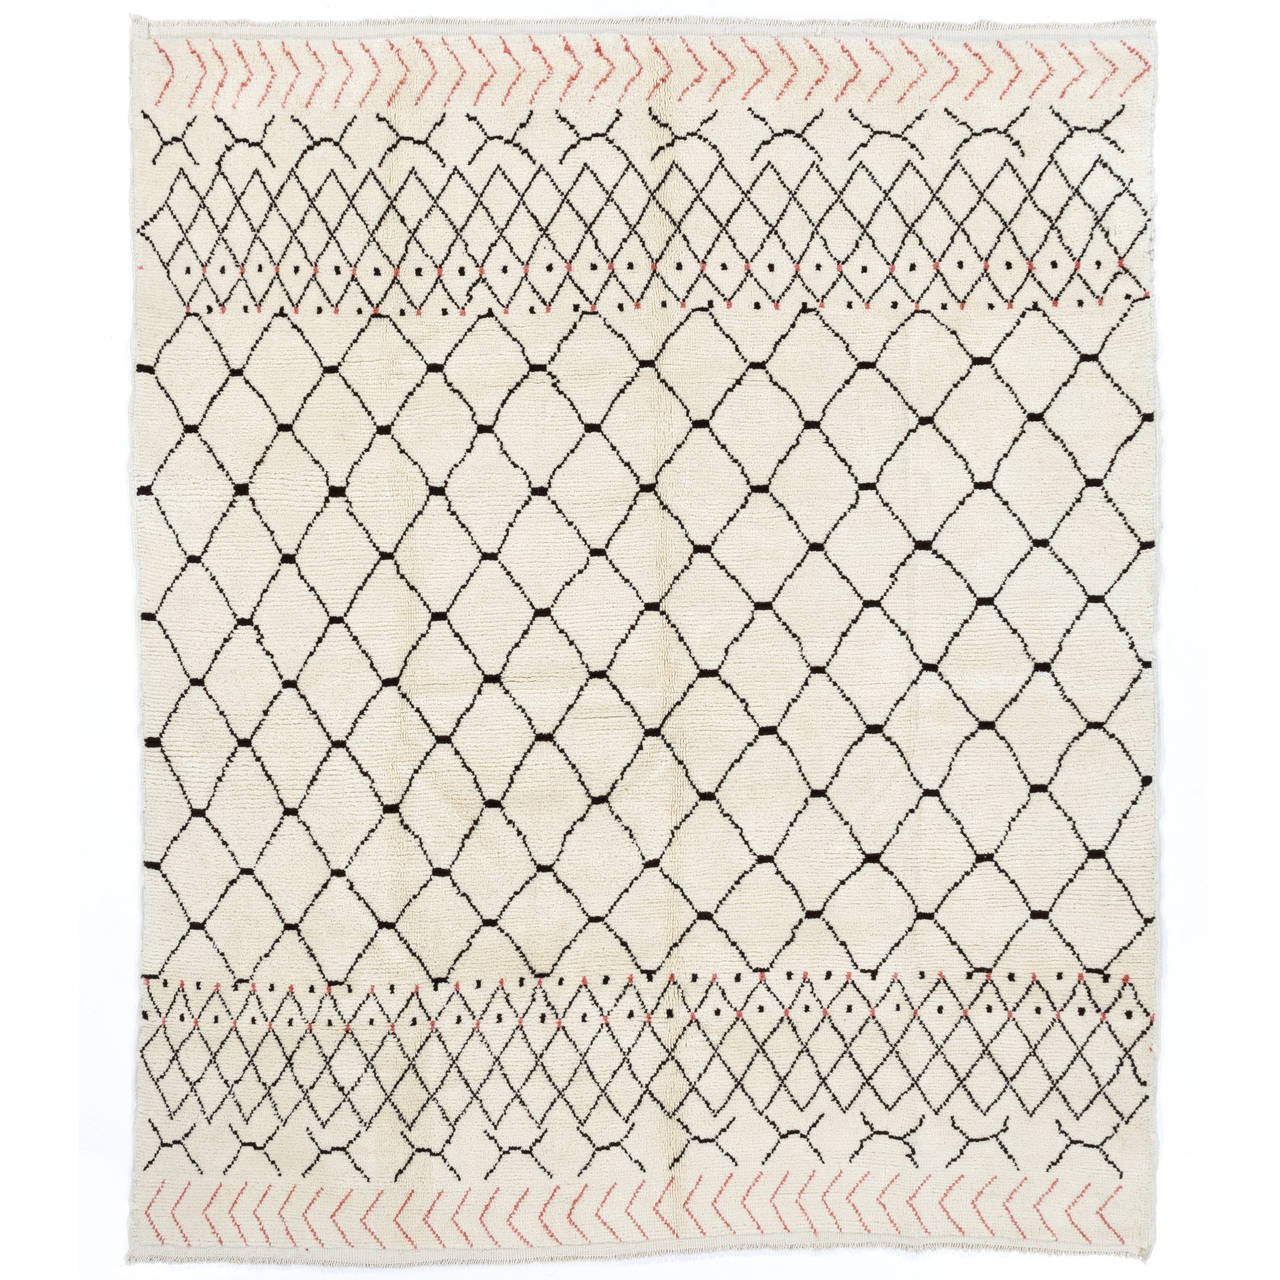 Contemporary Moroccan Berber Design Wool Rug For Sale at 1stdibs